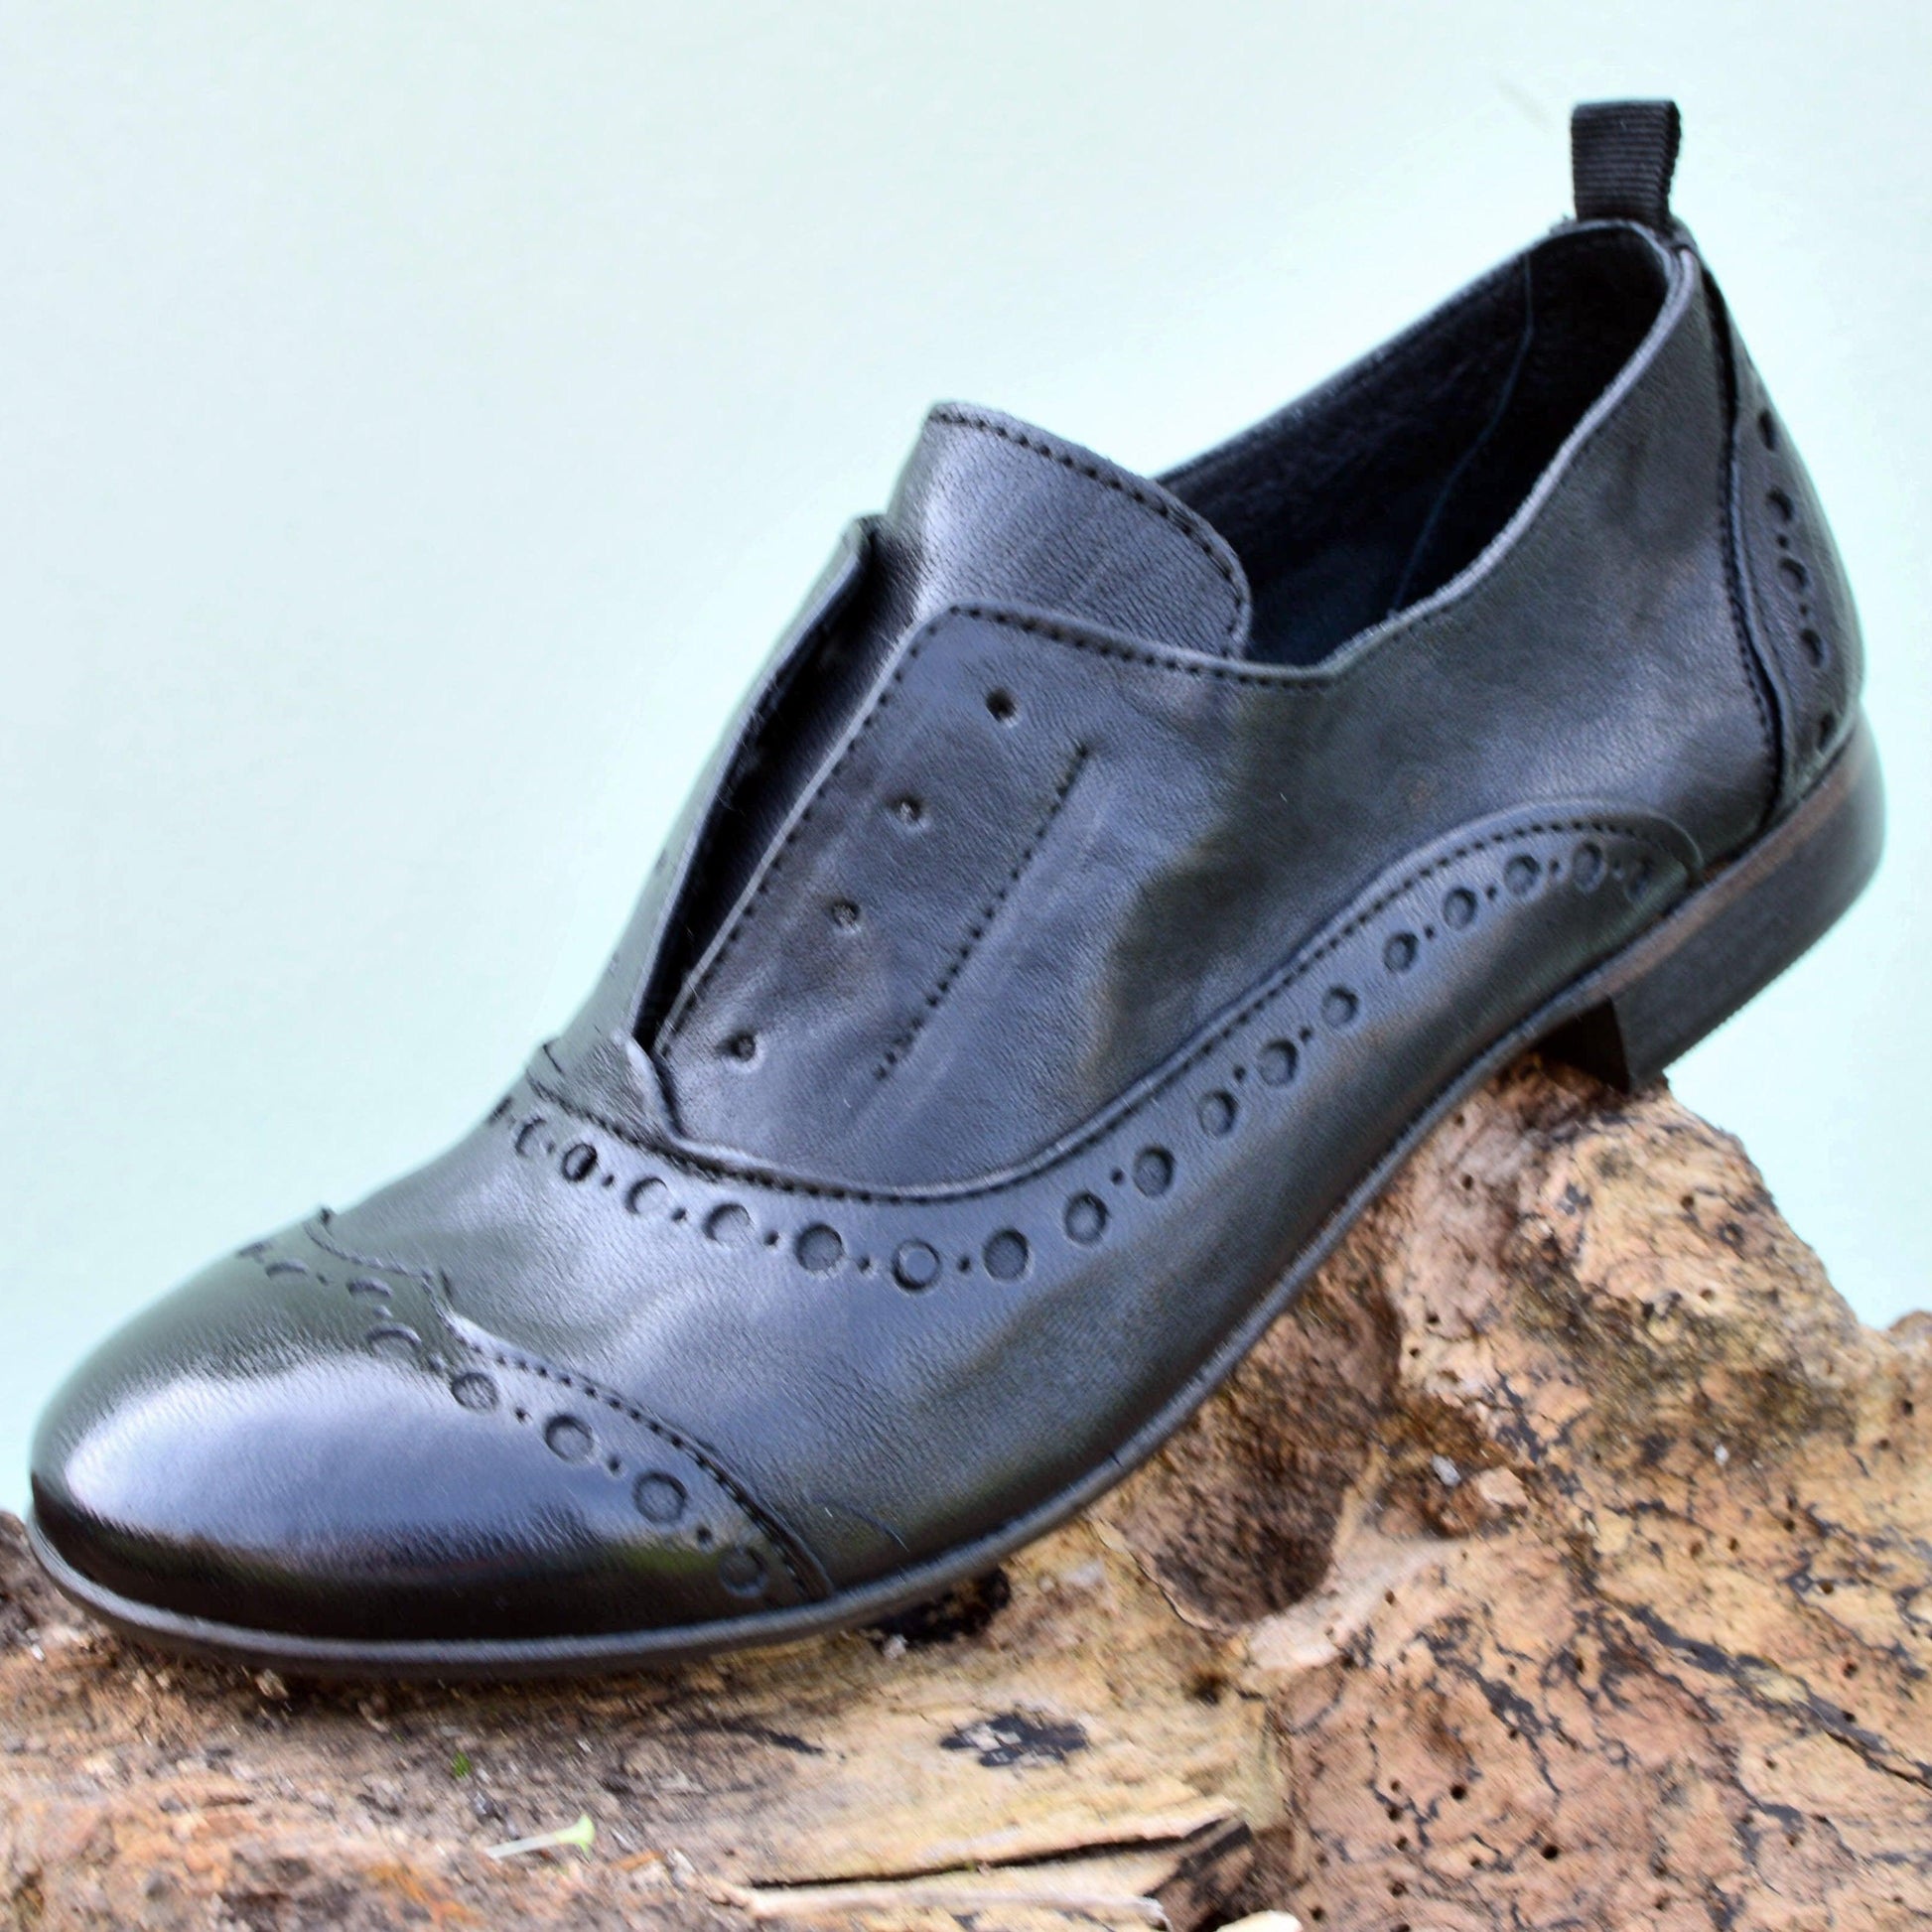 GIUSY 070 - Texas Leather SHOES BLACK - History541